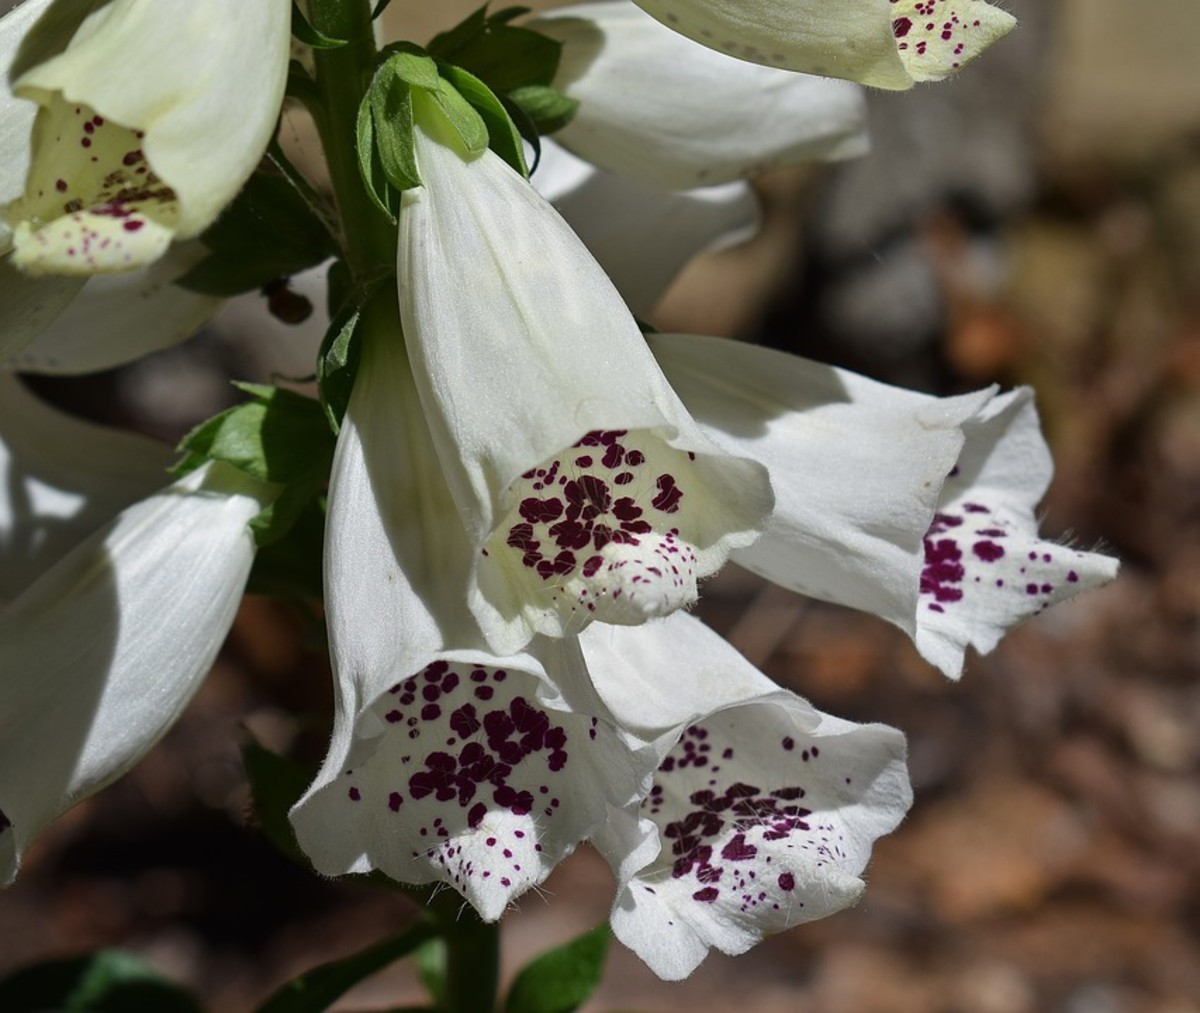 White floxgloves.  Bees follow the spots inside the flowers to the pollen that they seek.